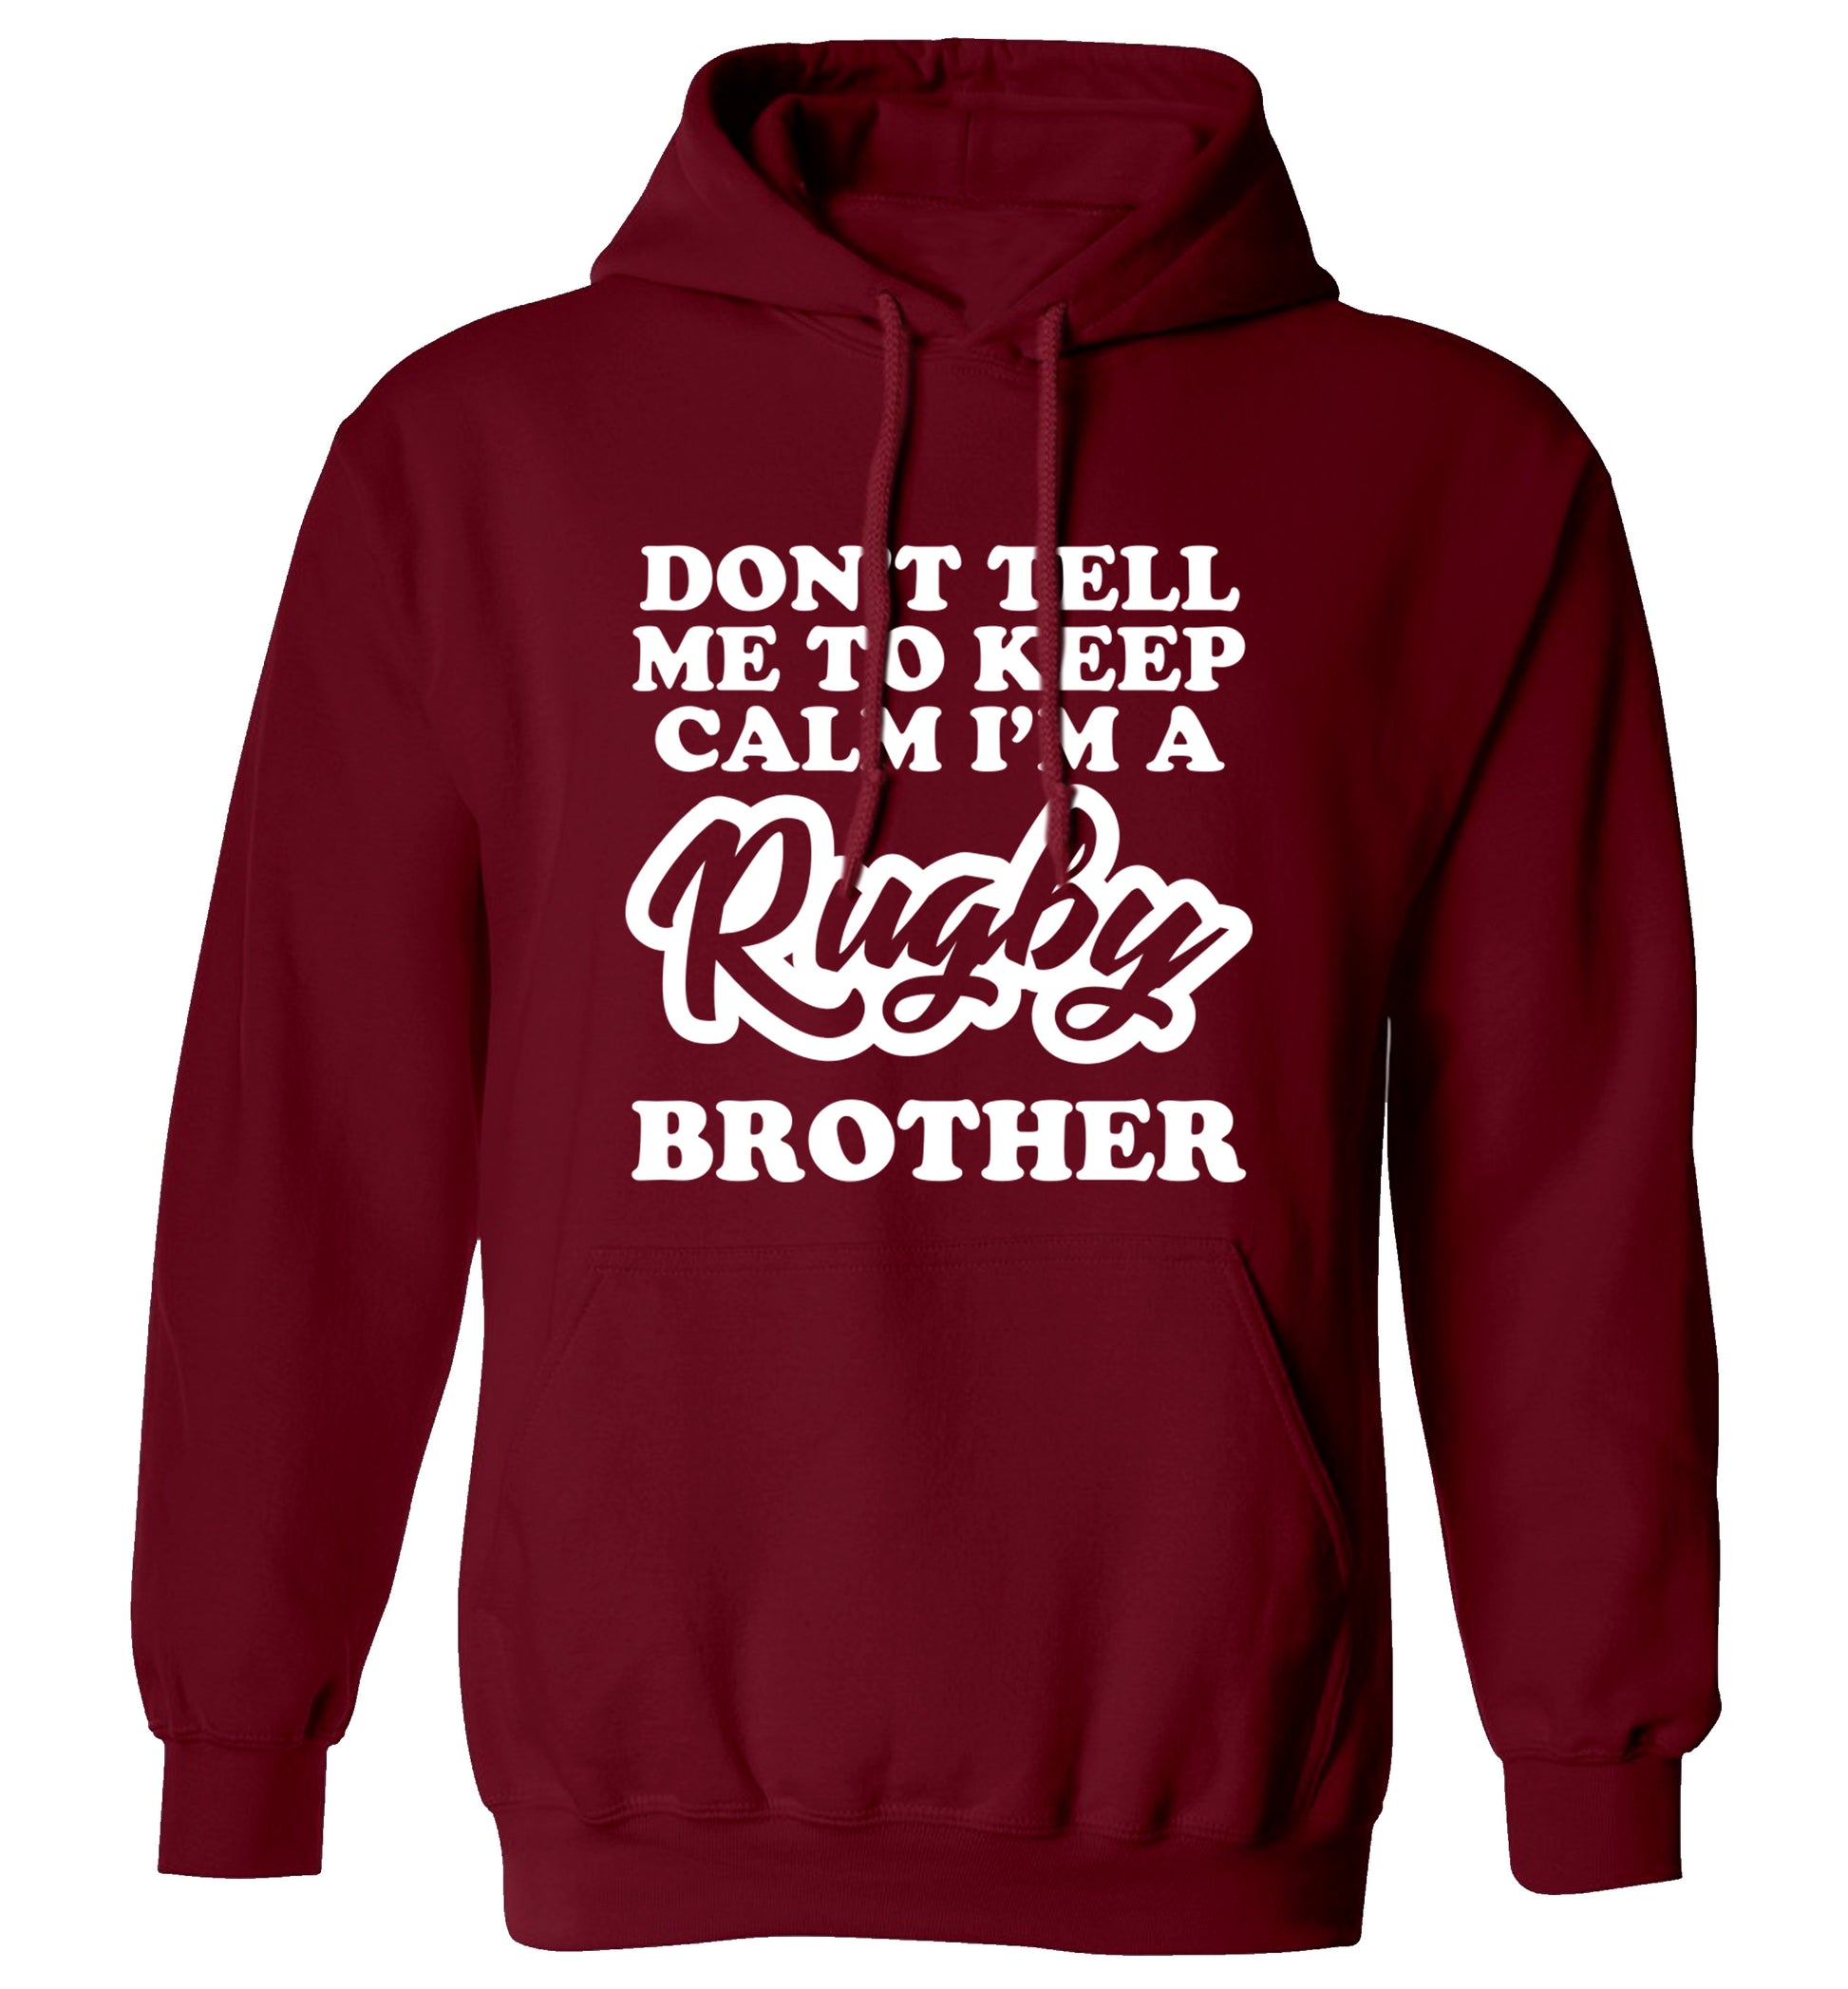 Don't tell me keep calm I'm a rugby brother adults unisex maroon hoodie 2XL